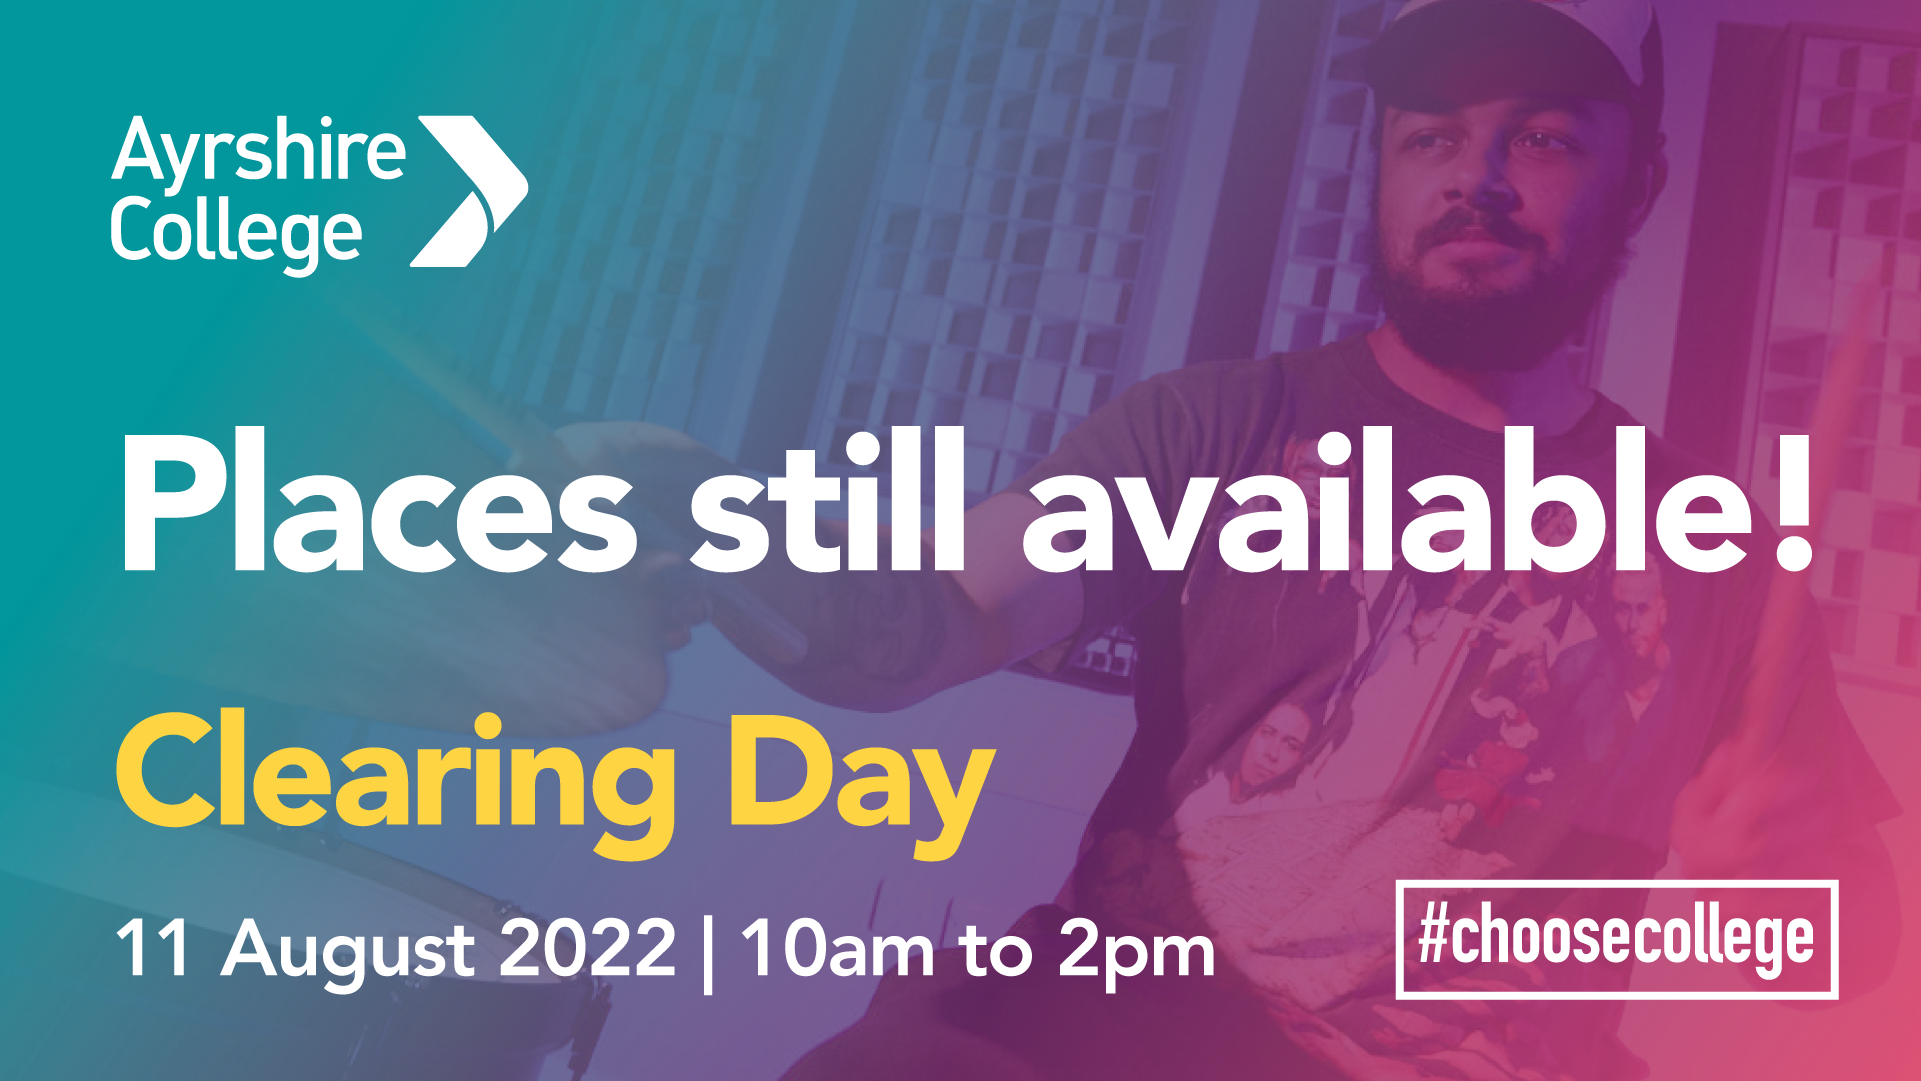 Secure a place at Ayrshire College’s Clearing Day